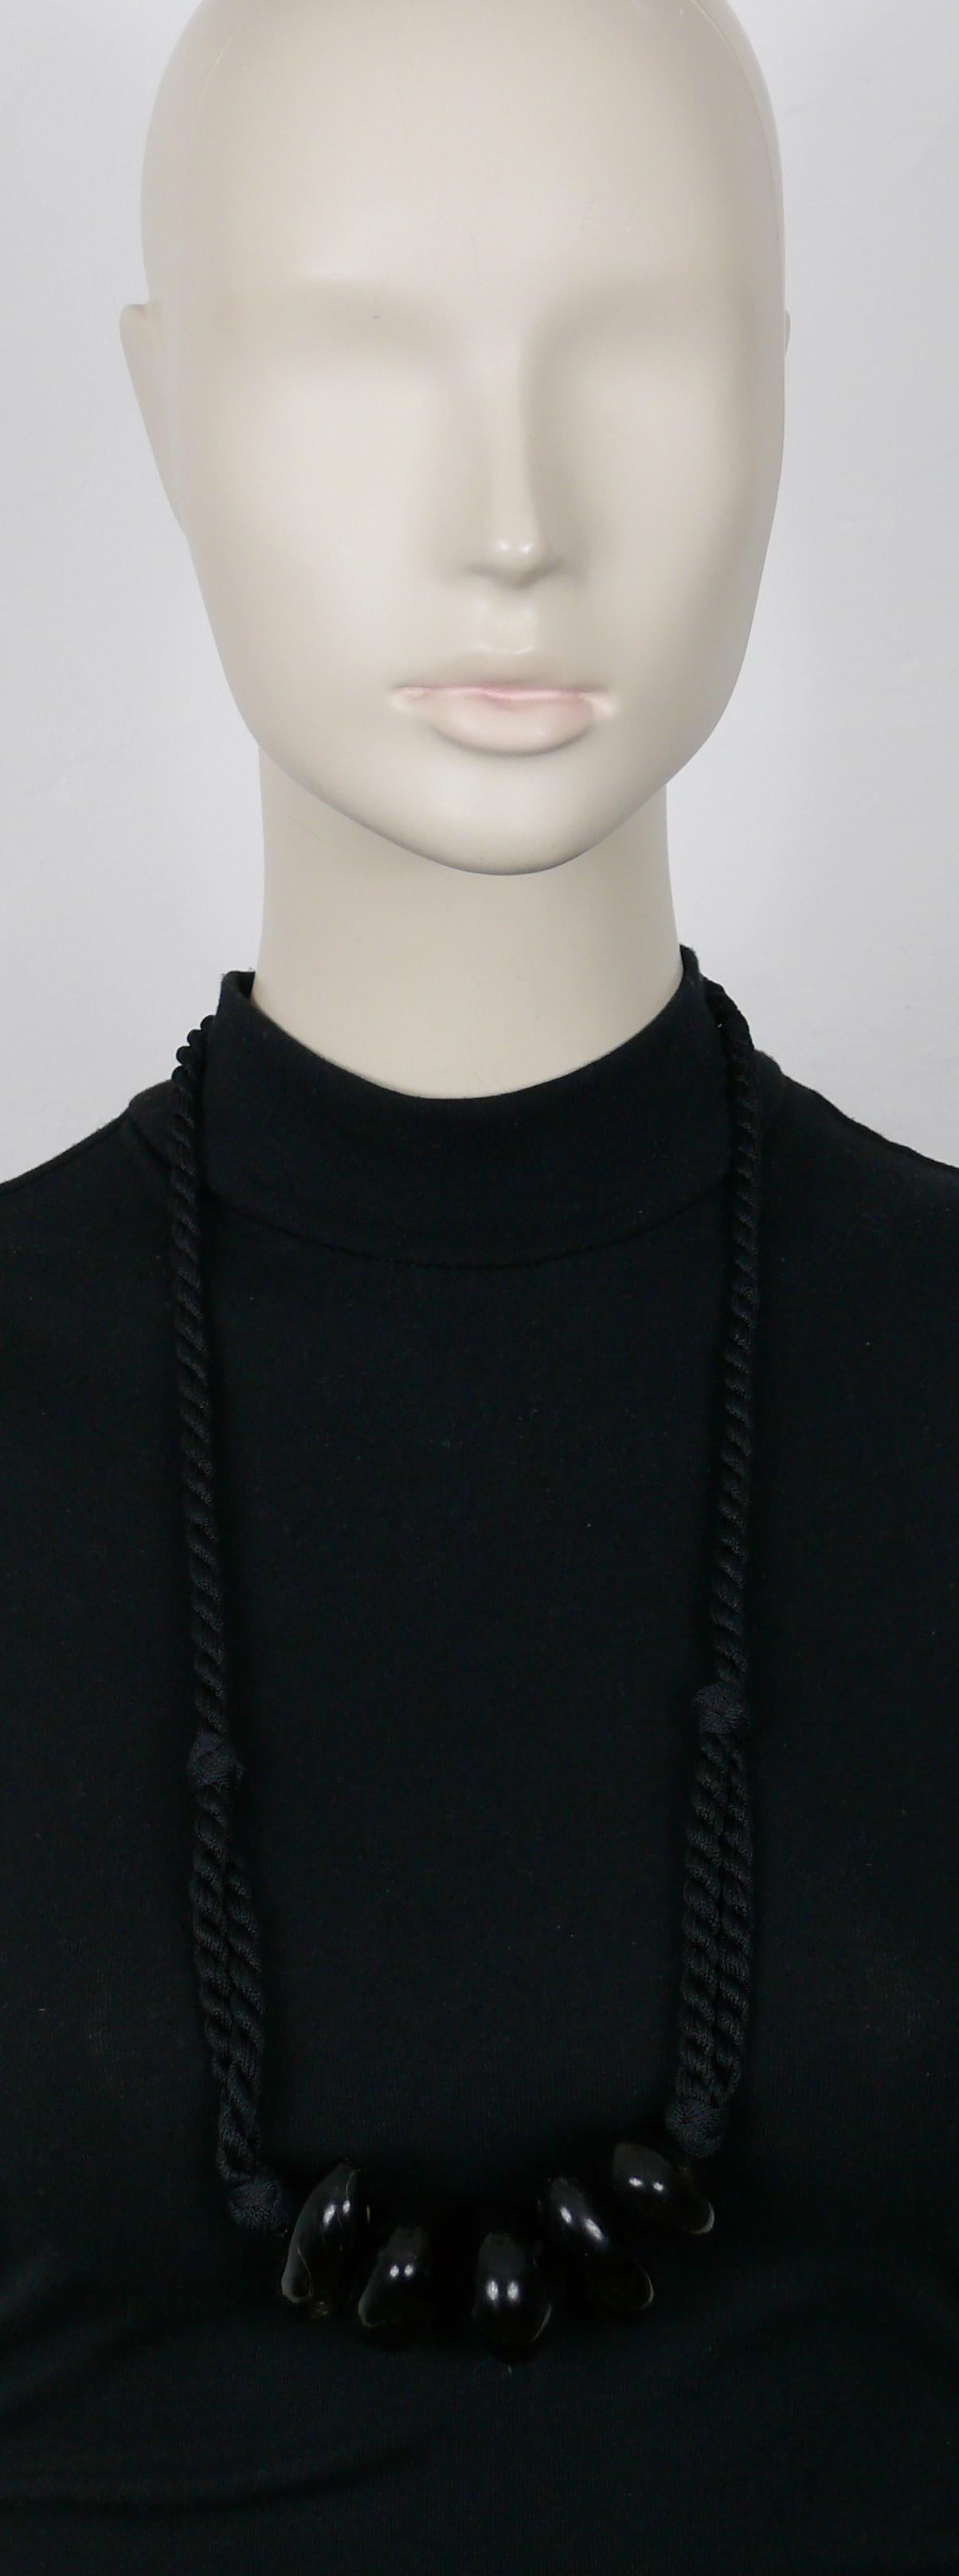 YVES SAINT LAURENT black rope tassel necklace featuring five chunky black marbled resin pebbles.

Embossed YVES SAINT LAURENT Rive Gauche.
Made in France.

Indicative measurements : length worn approx. 35 cm (13.78 inches).

Material : Passementerie